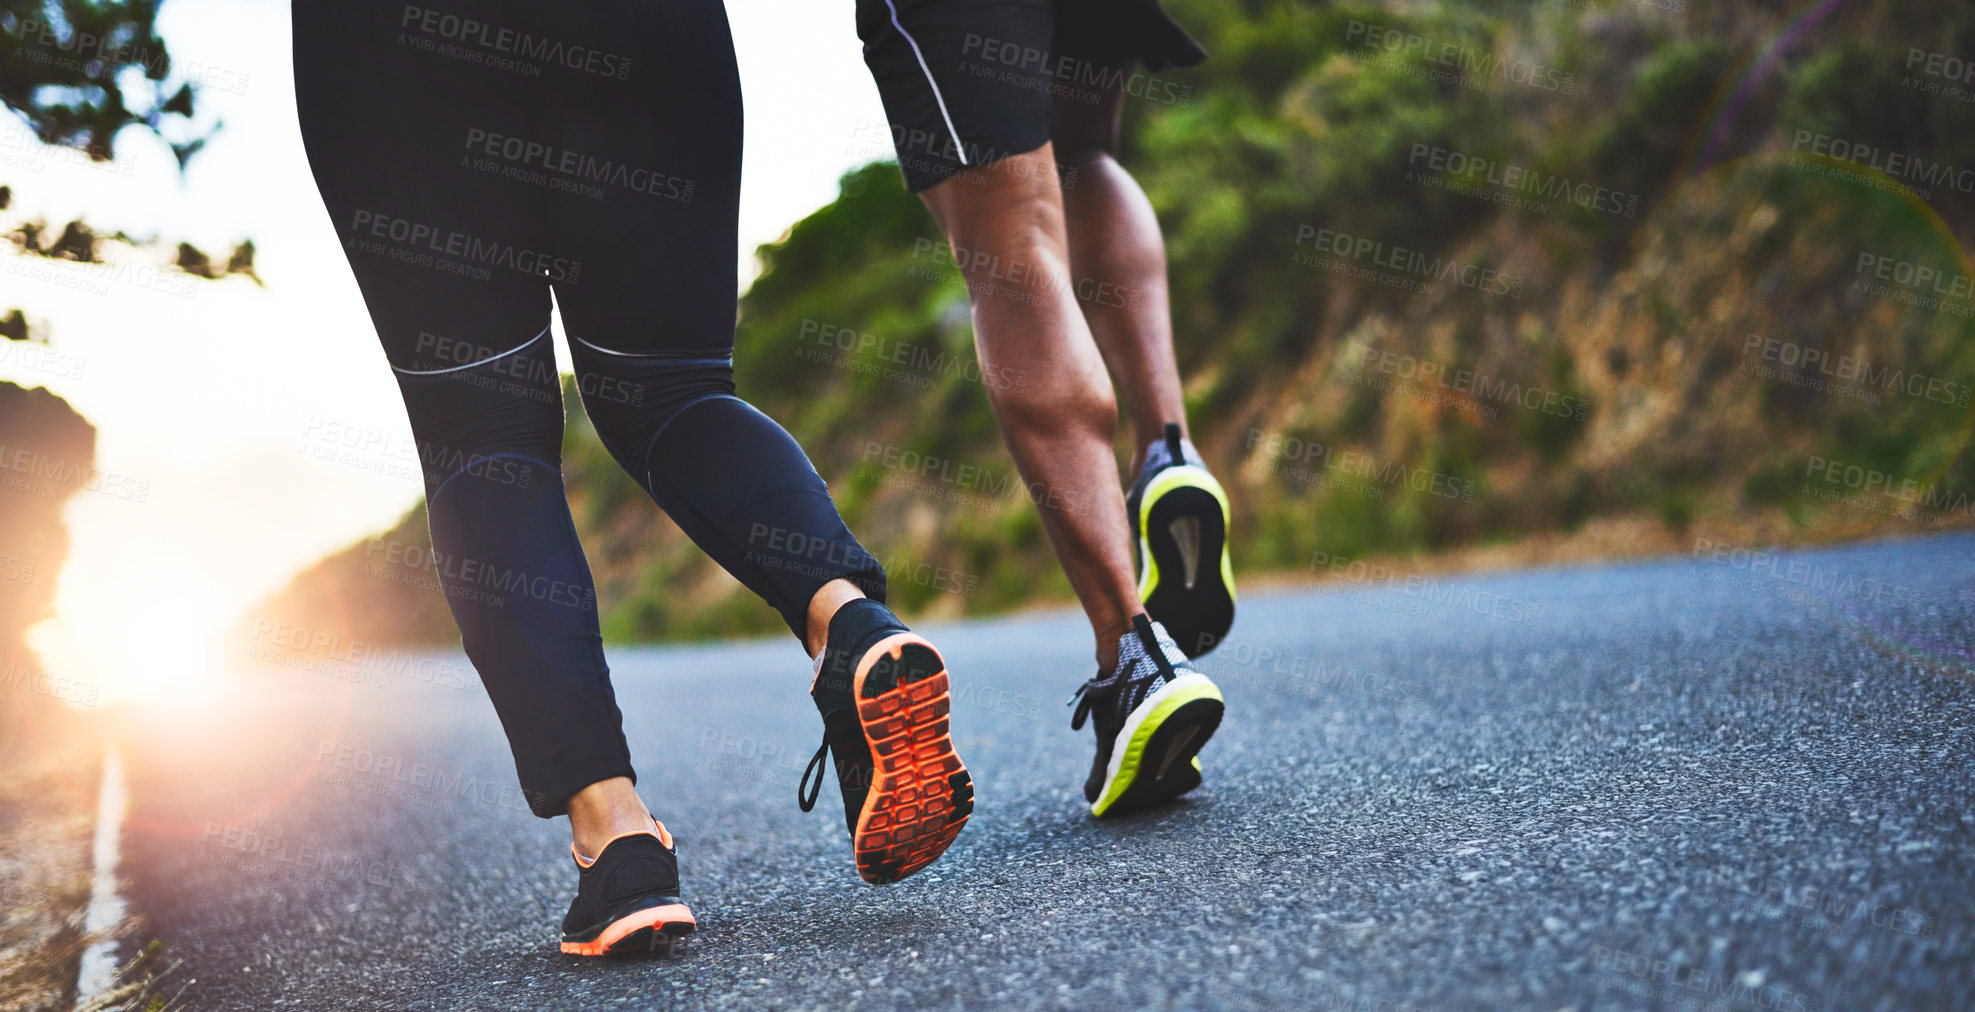 Buy stock photo Low angle shot of an unrecognizable couple out running together